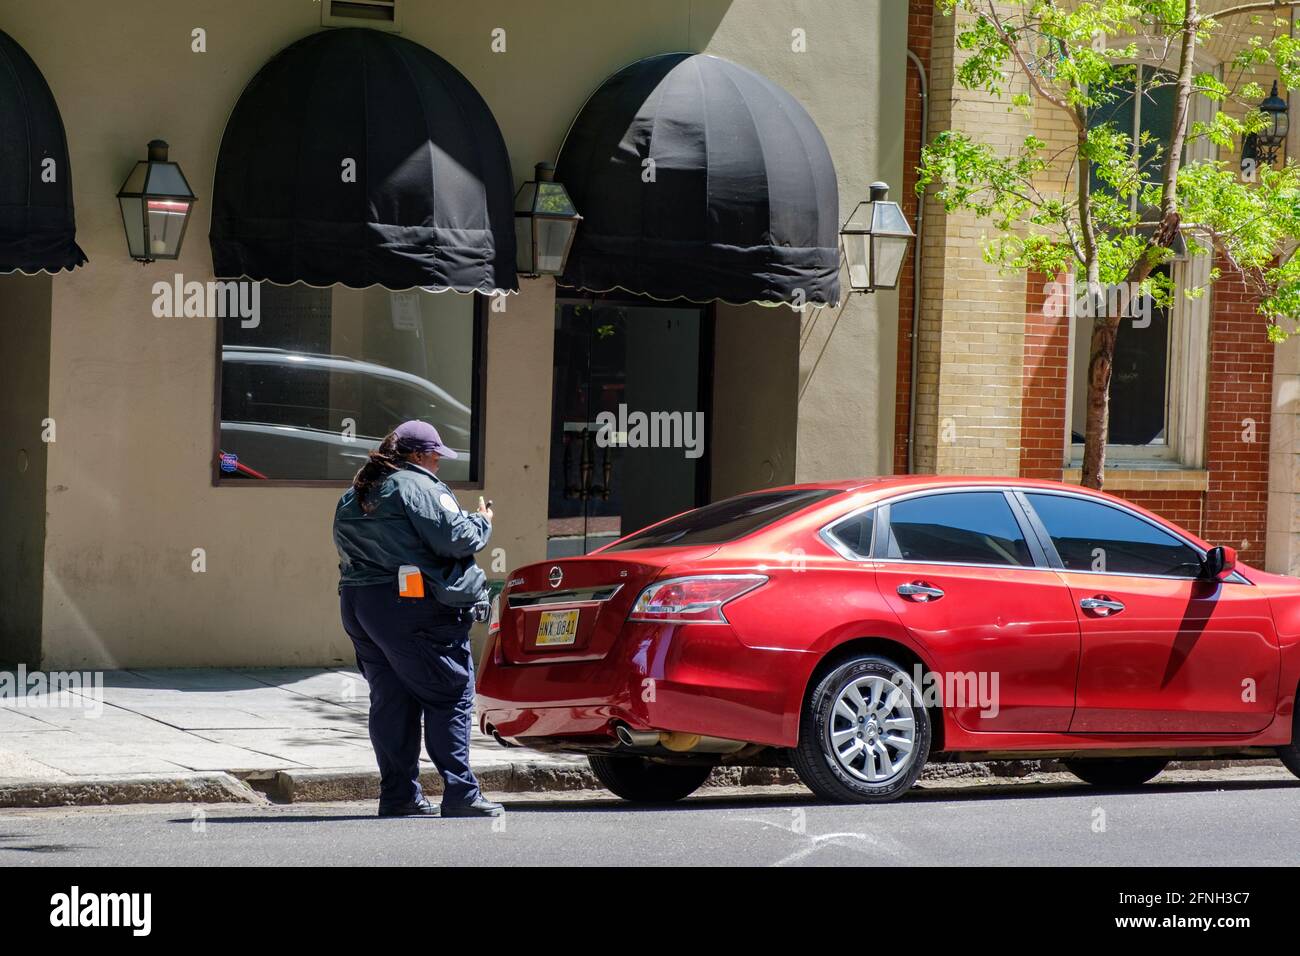 NEW ORLEANS, LA, USA - APRIL 21, 2021: Parking control officer writes a ticket for an illegally parked car Stock Photo